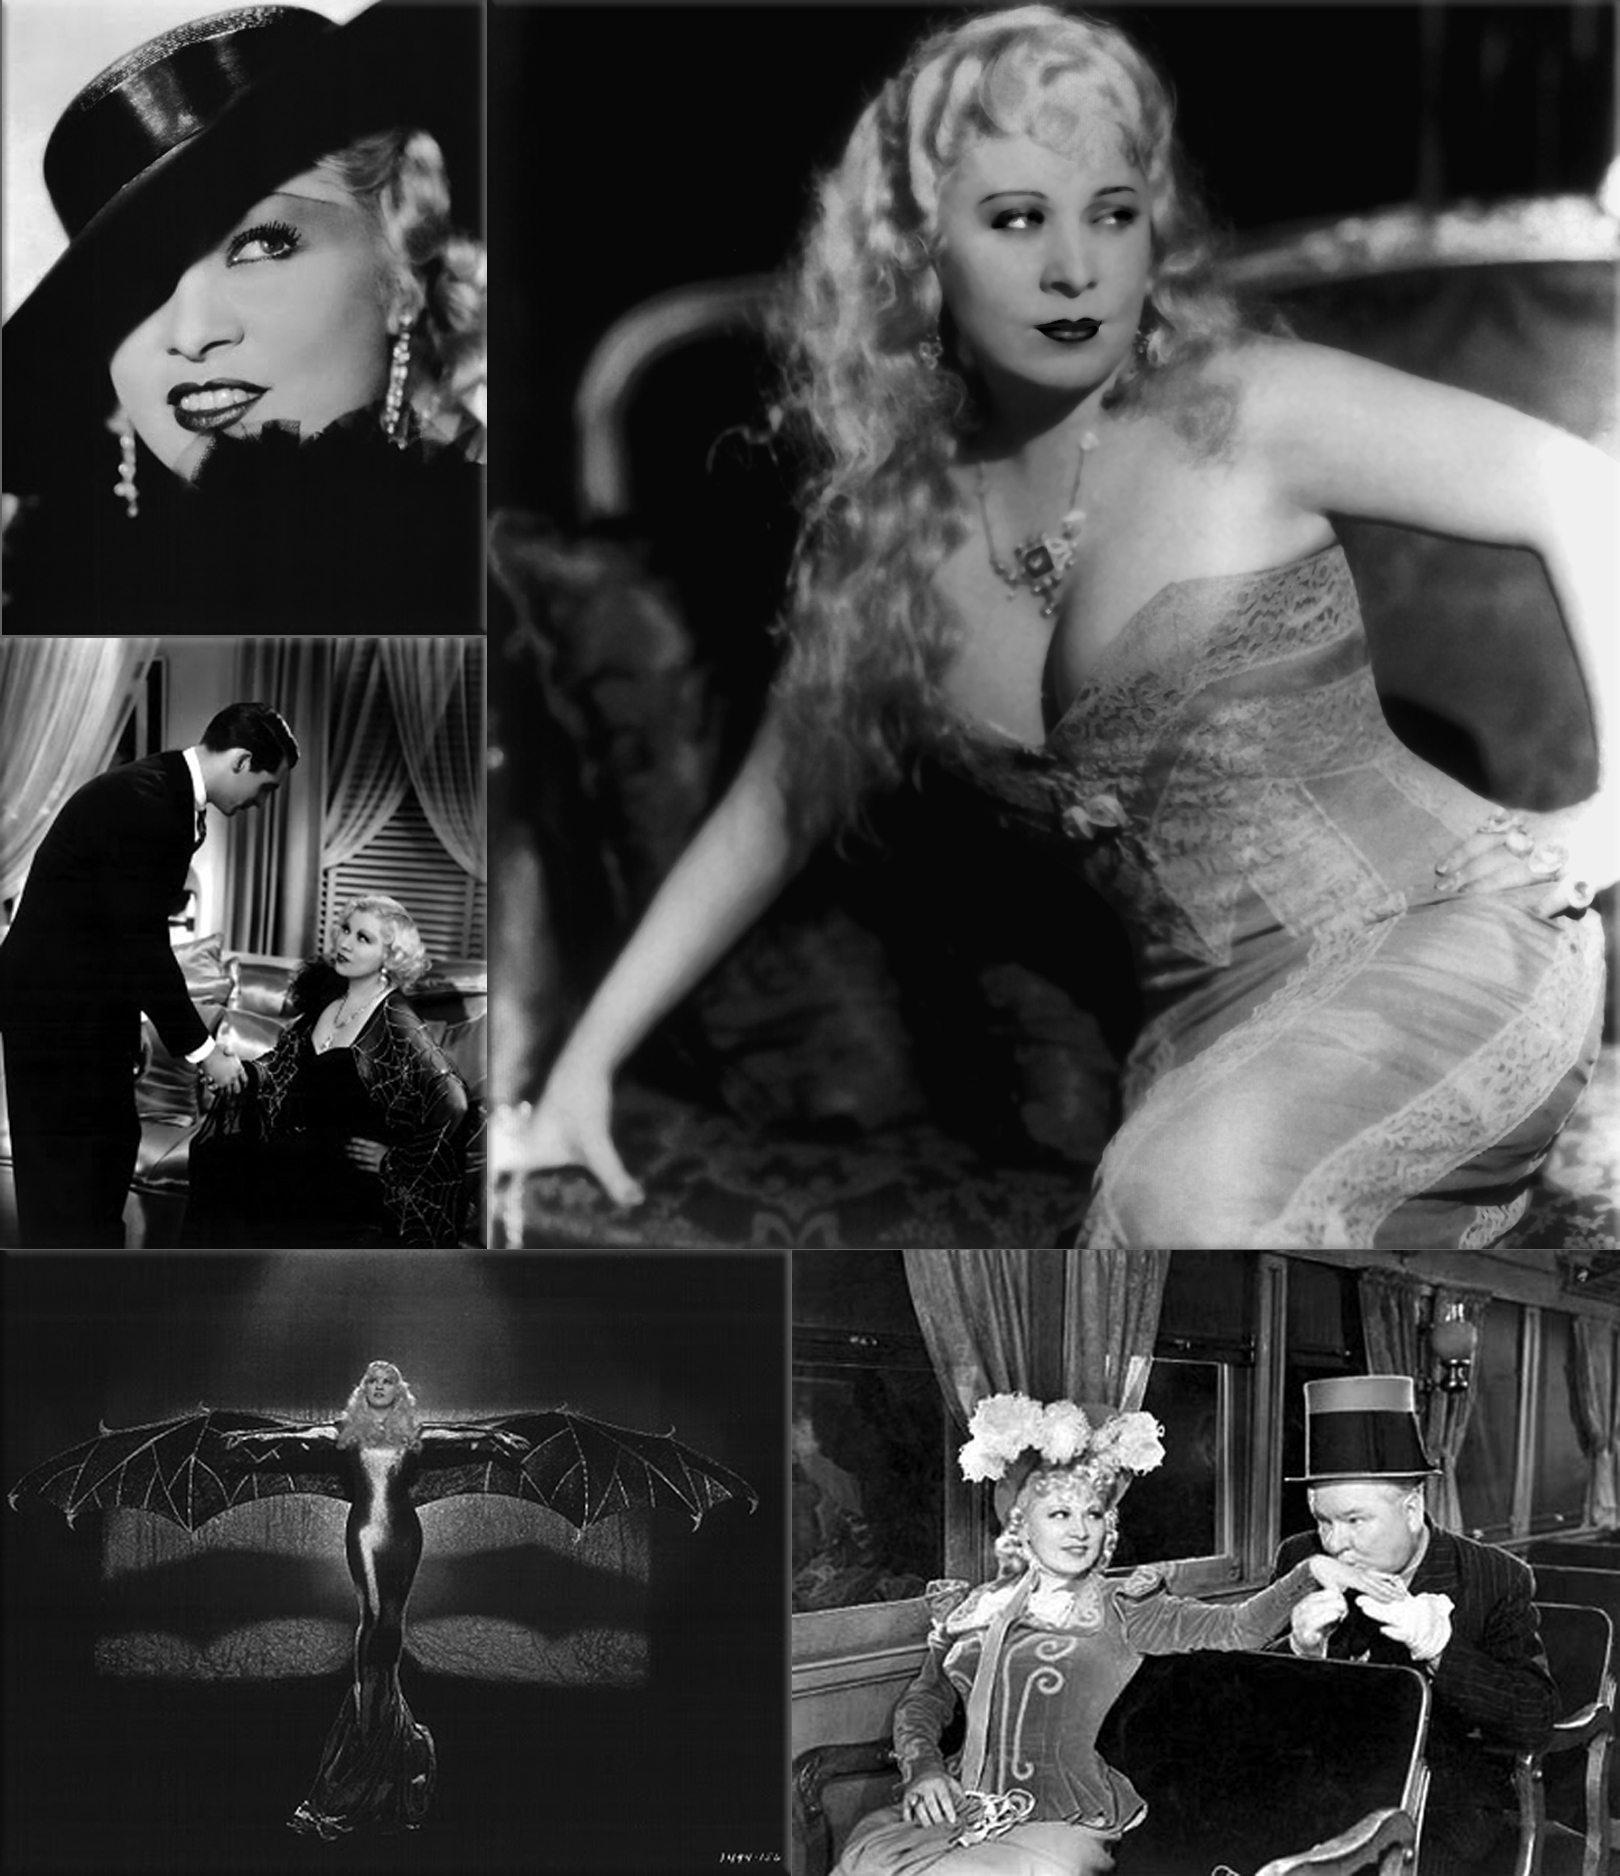 Mae West: I'm No Angel (1933) ● as Mae West Lady Lou in She Done Him Wrong (1933) ● Diamond Lil (1928) ● My Little Chickadee (1940)